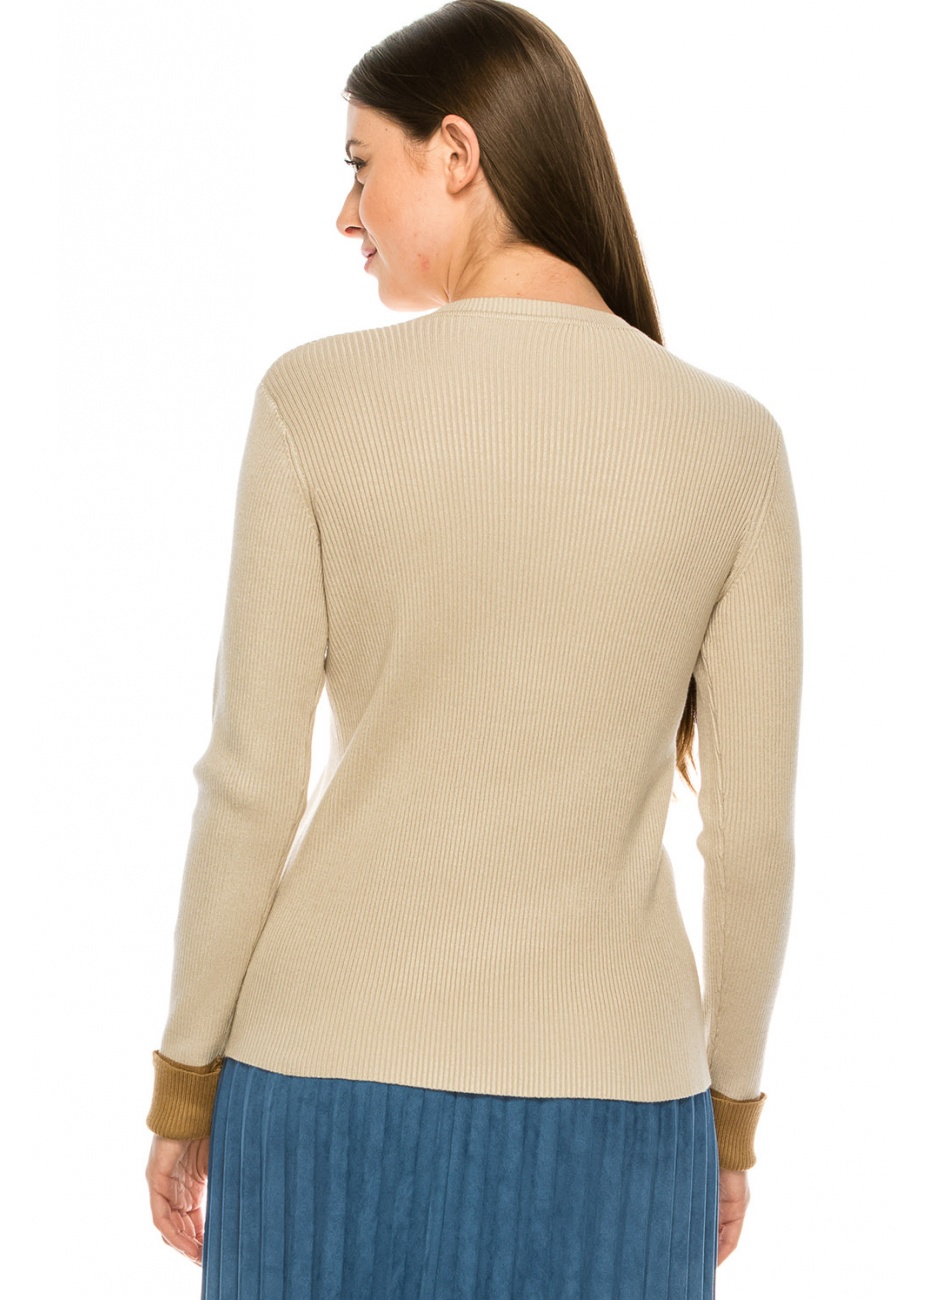 Ribbed Sweater with Large Buttons